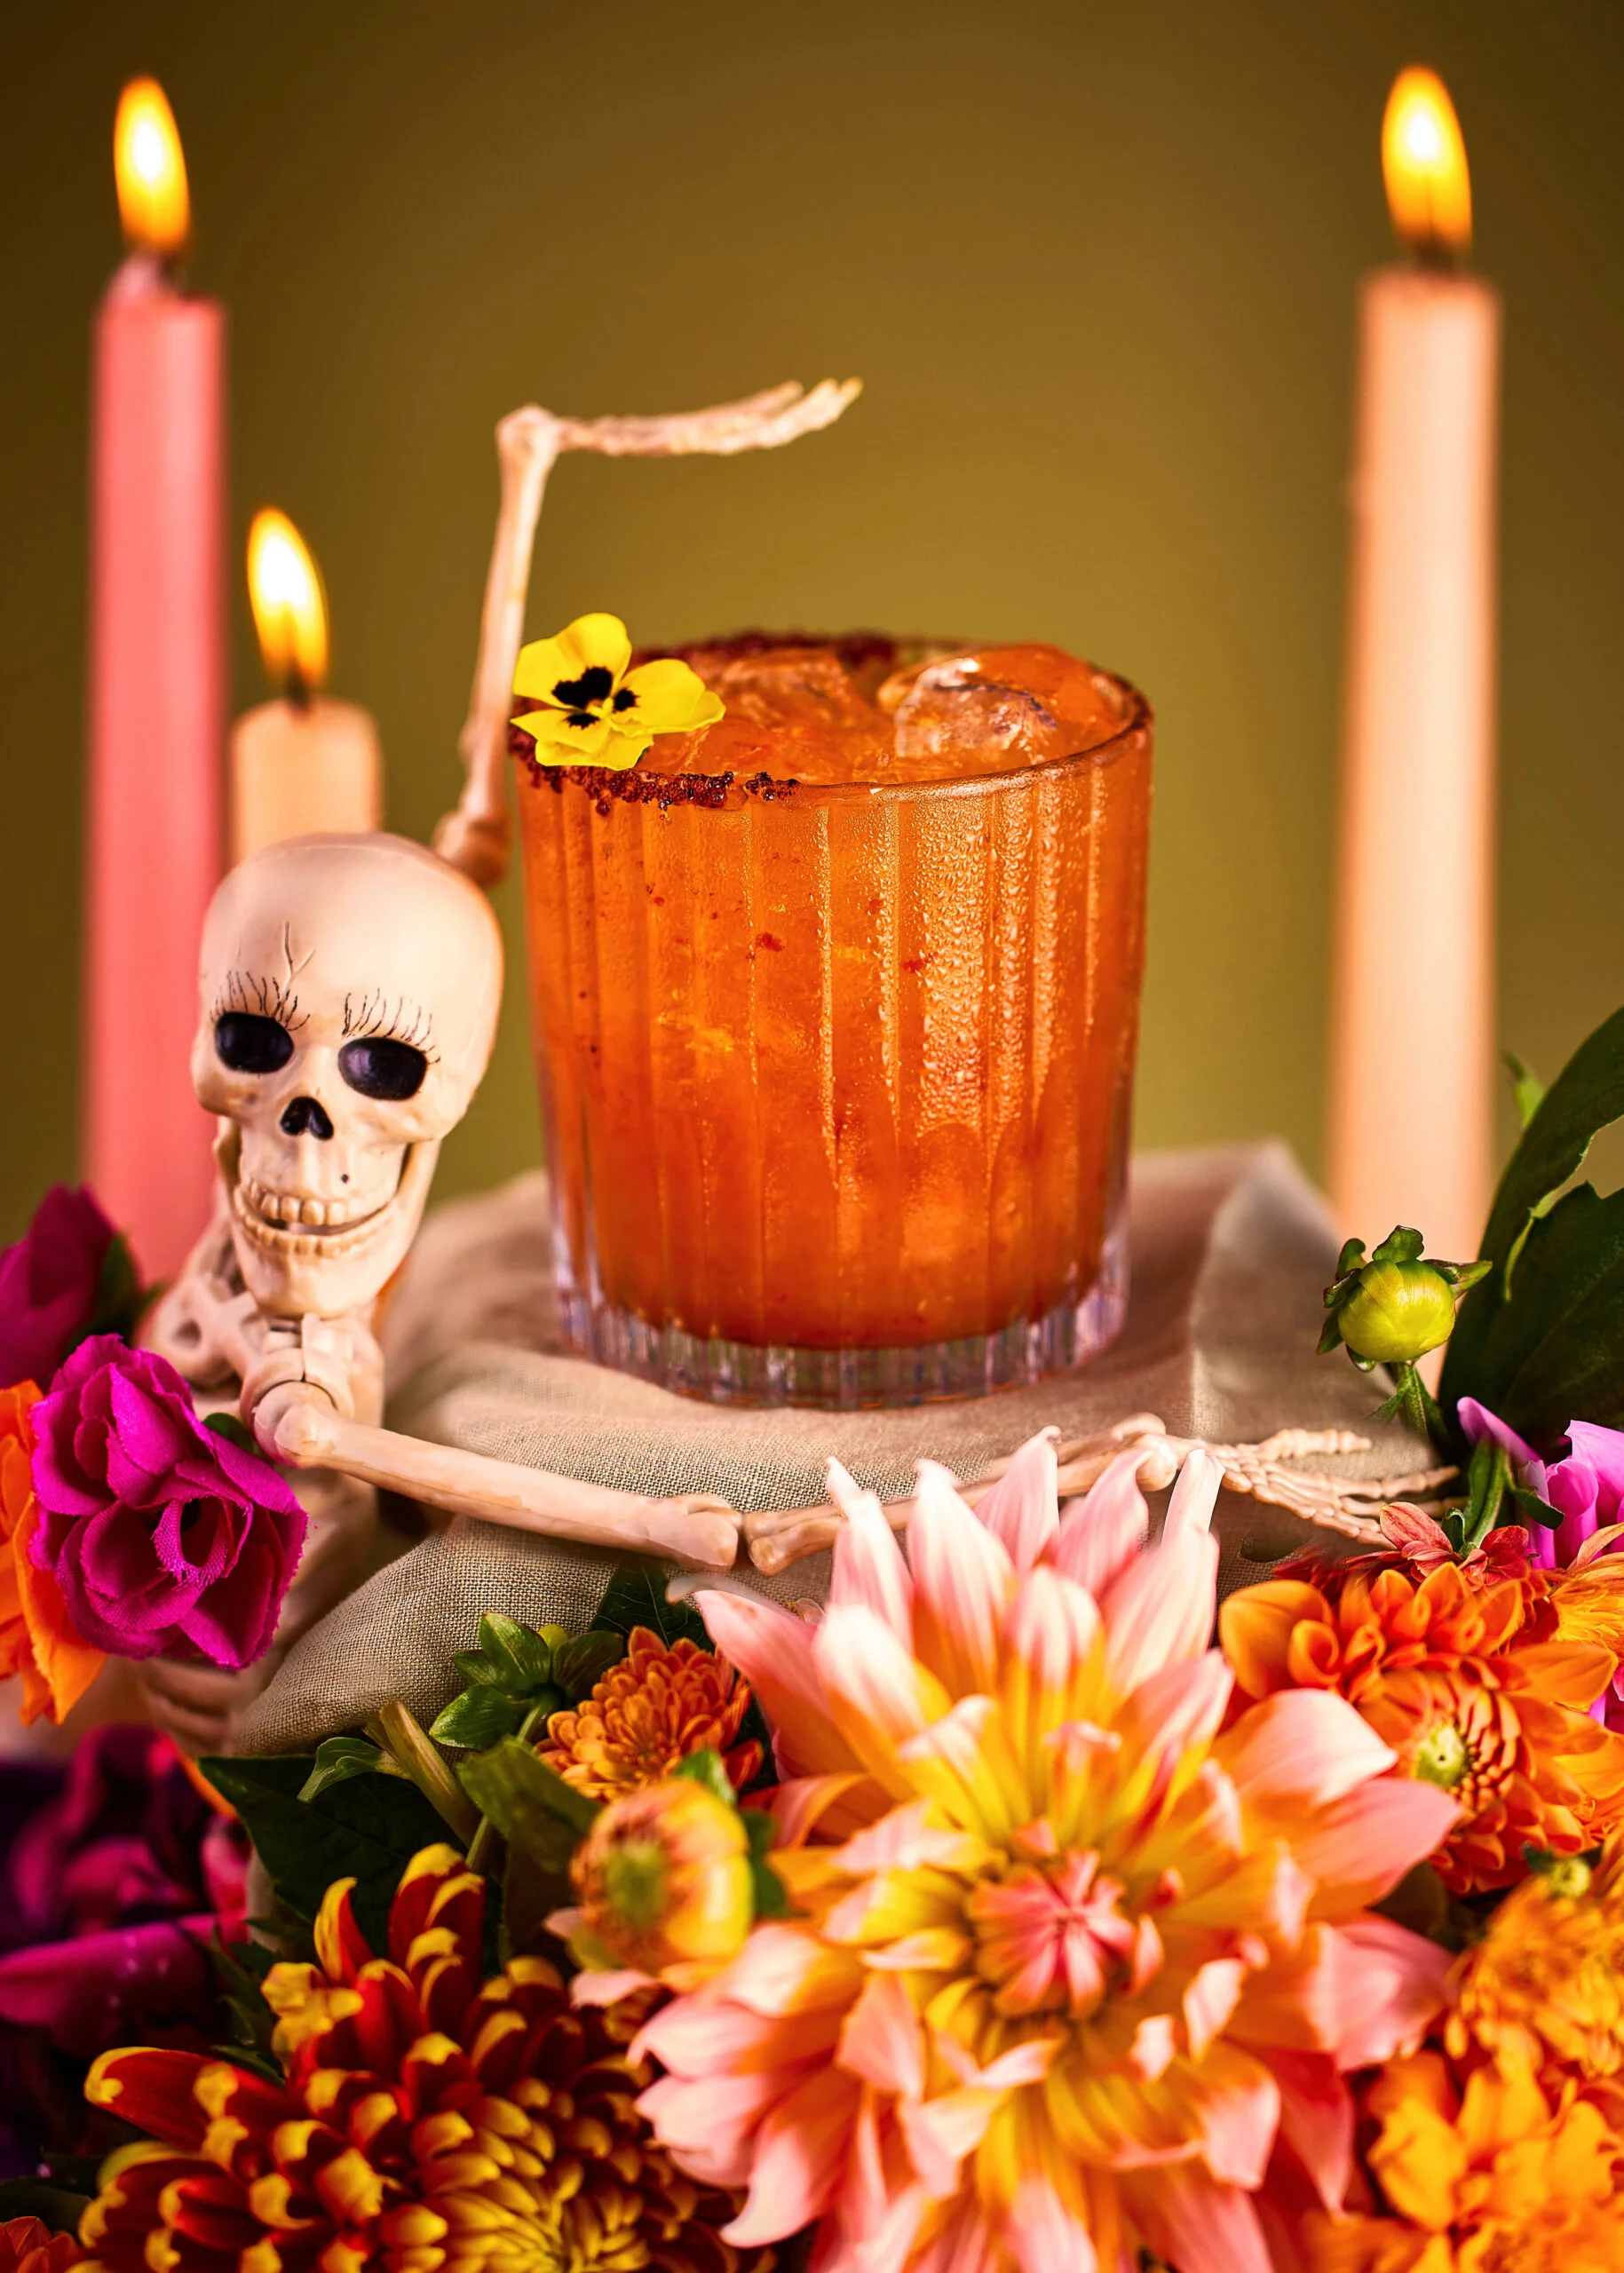 Day of the dead Mezcalita cocktail with flowers, candles and a Mexican calaca surrounding the drink